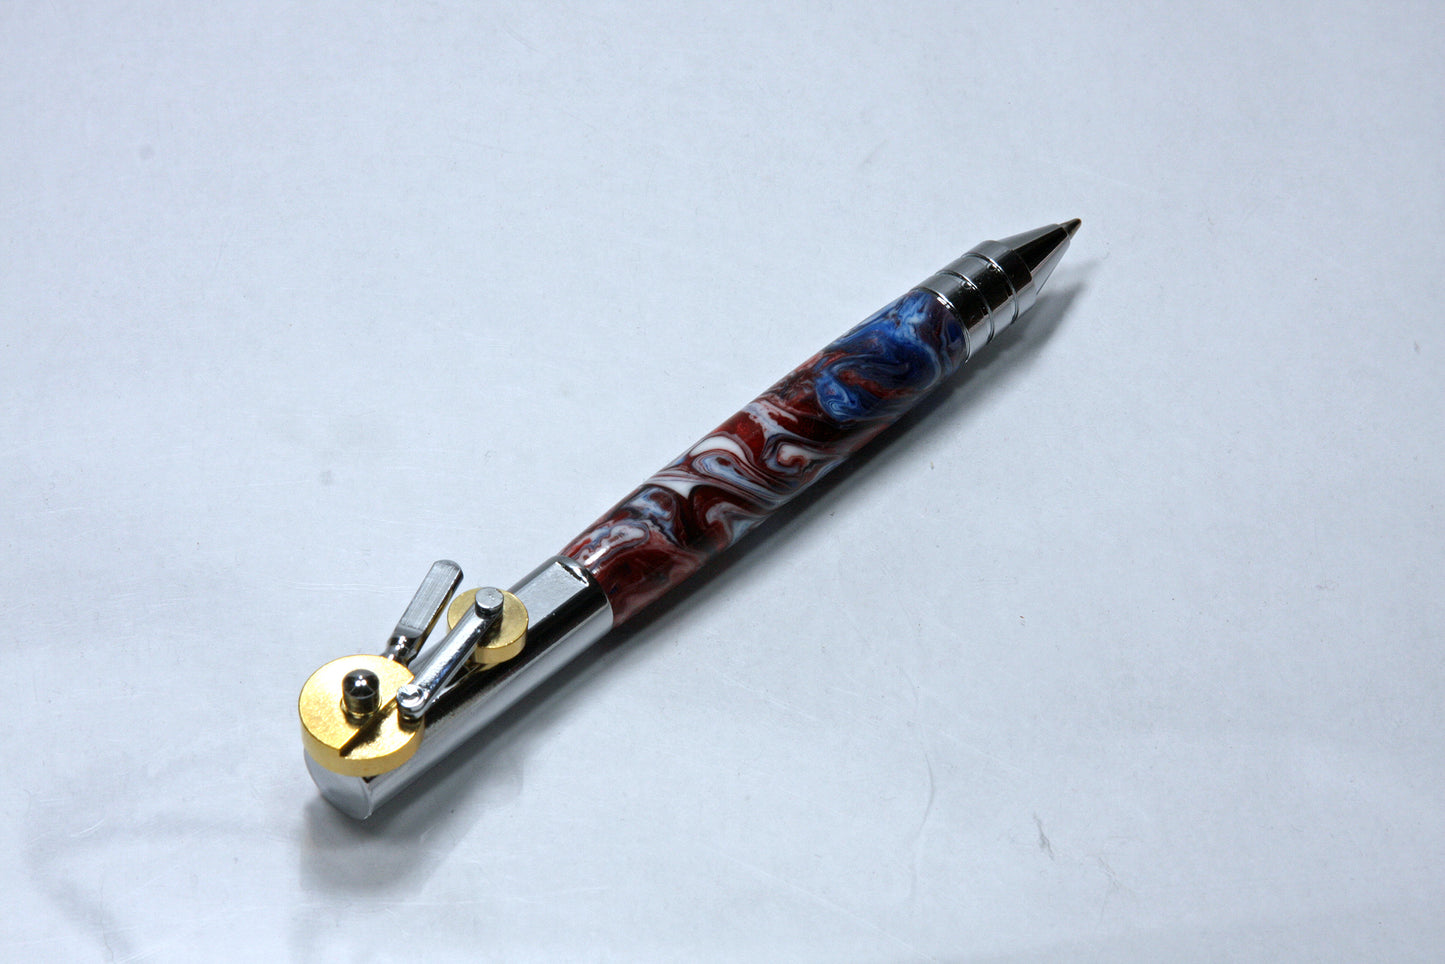 Steampunk Piston Ballpoint Pen with Clever Gear Action and patriotic acrylic Body